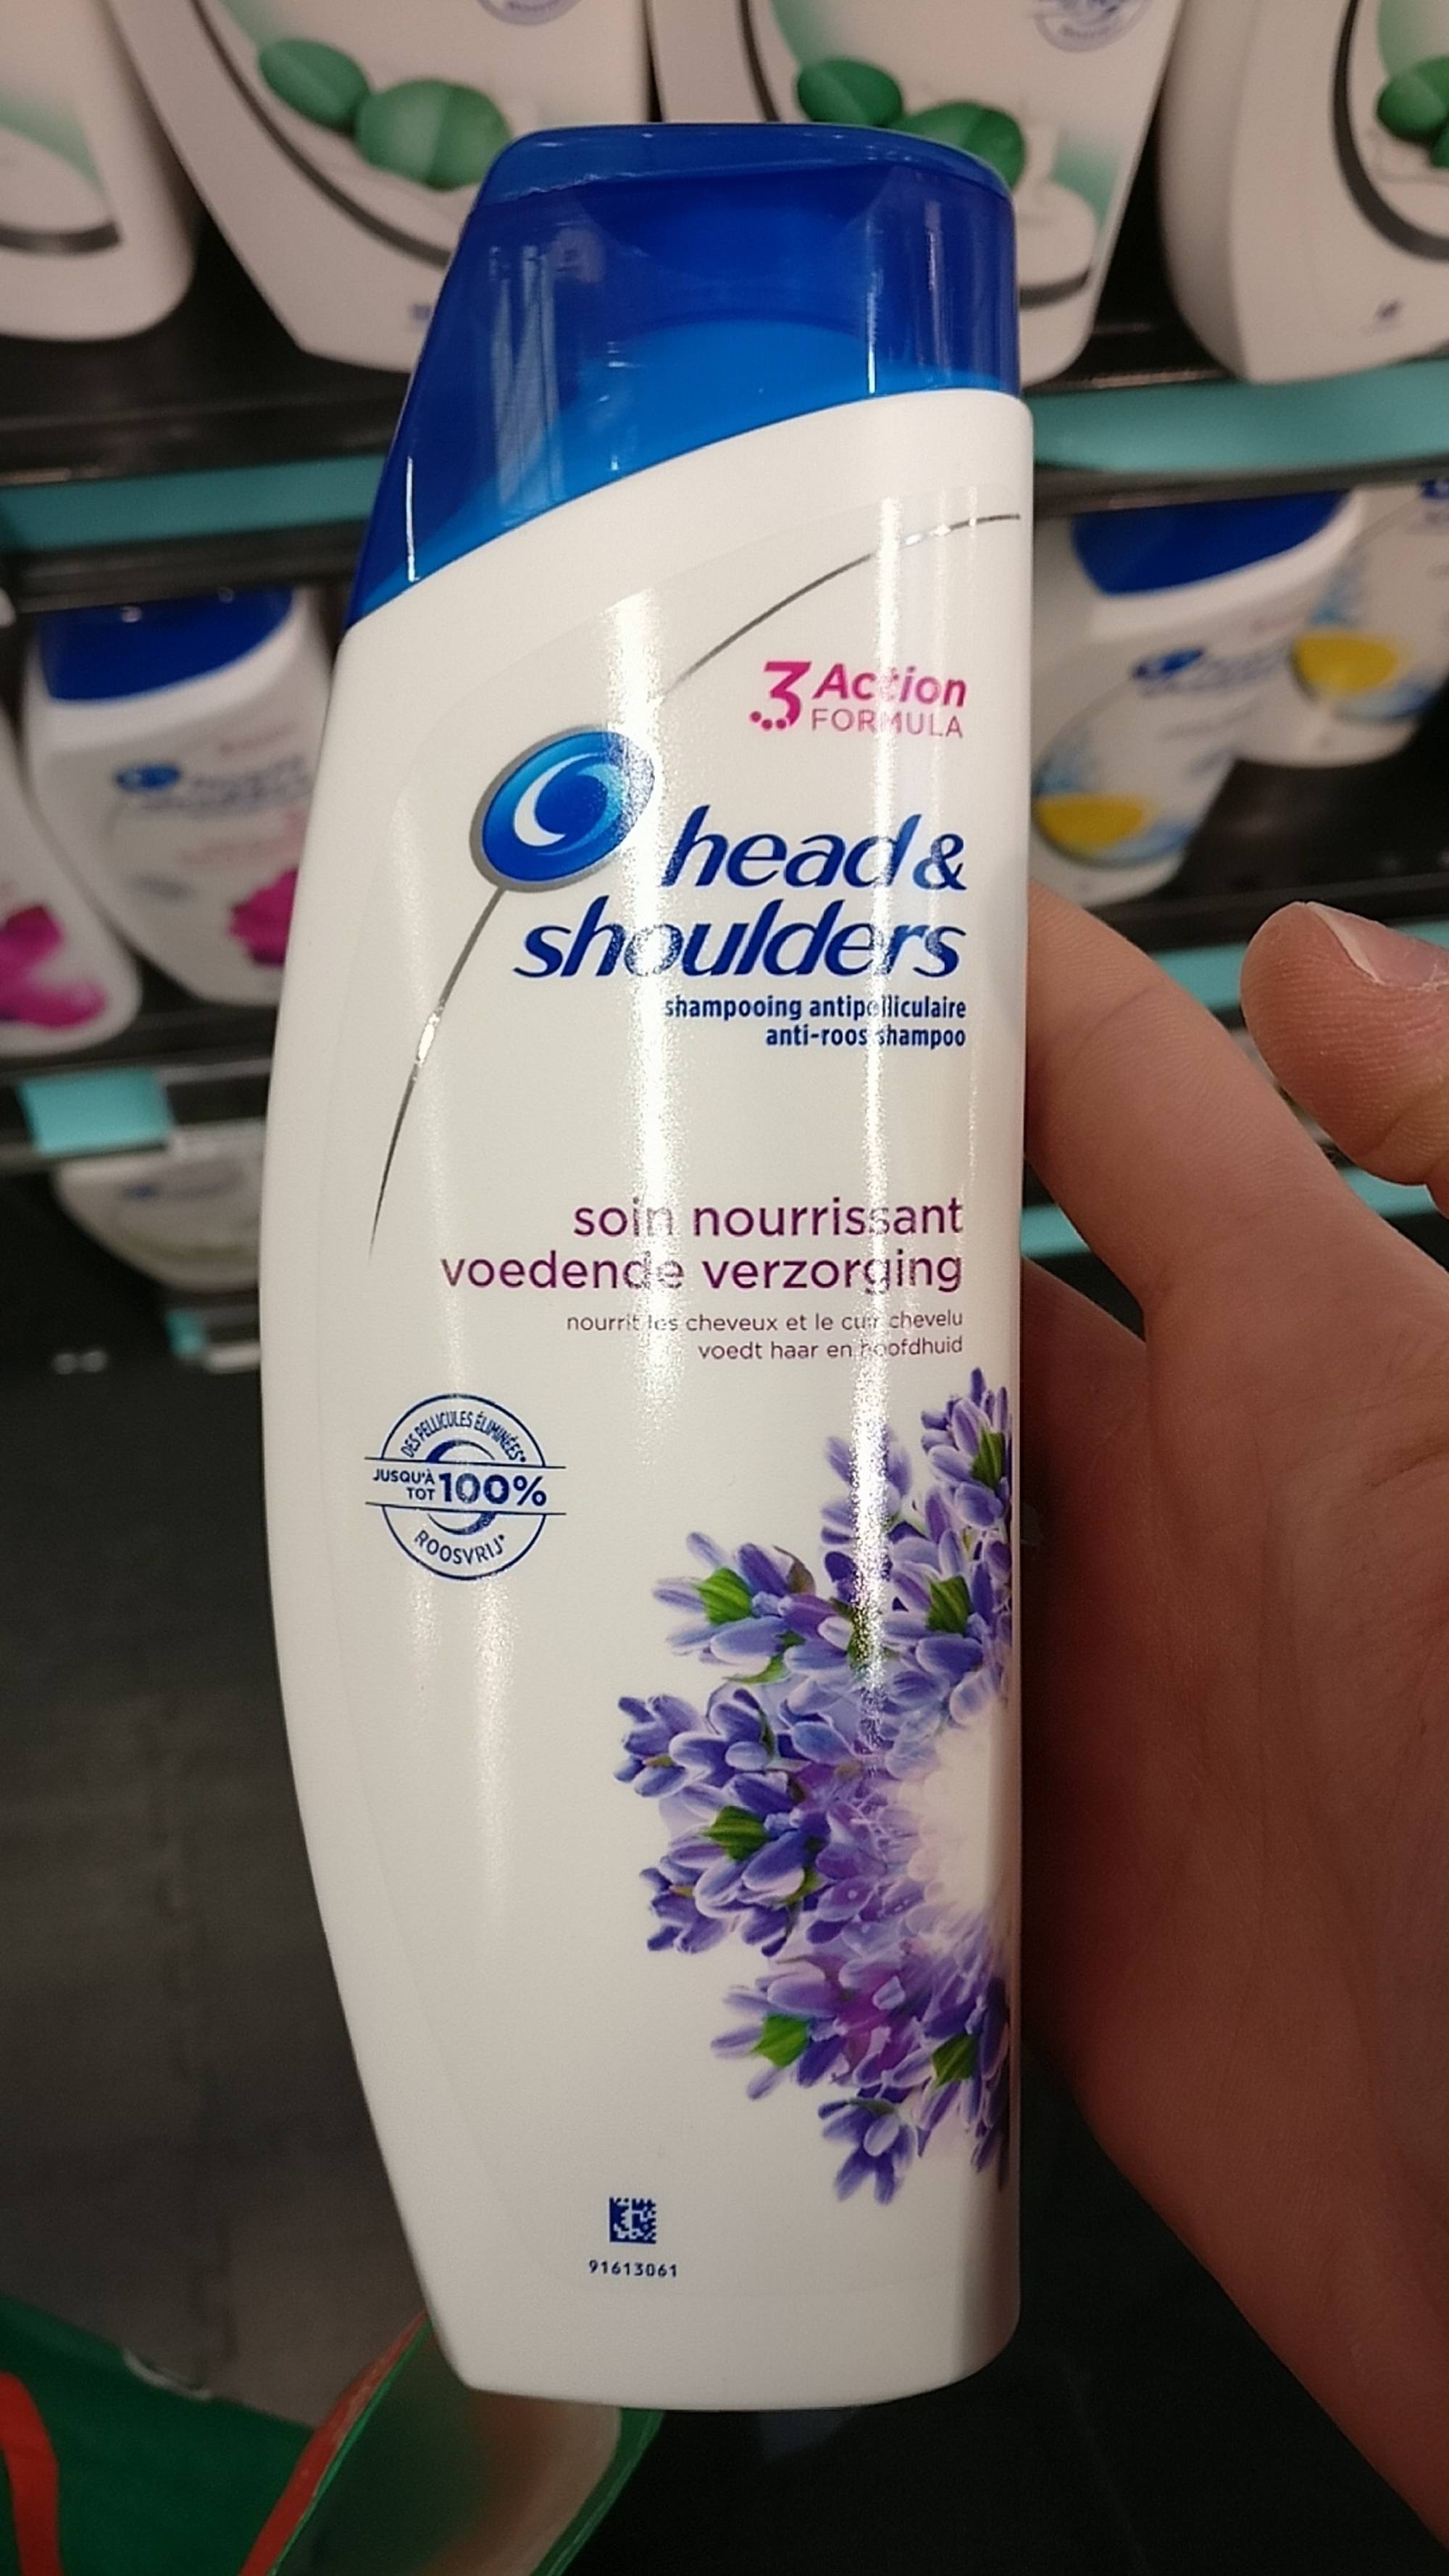 HEAD & SHOULDERS - Shampooing antipelliculaire soin nourrissant 